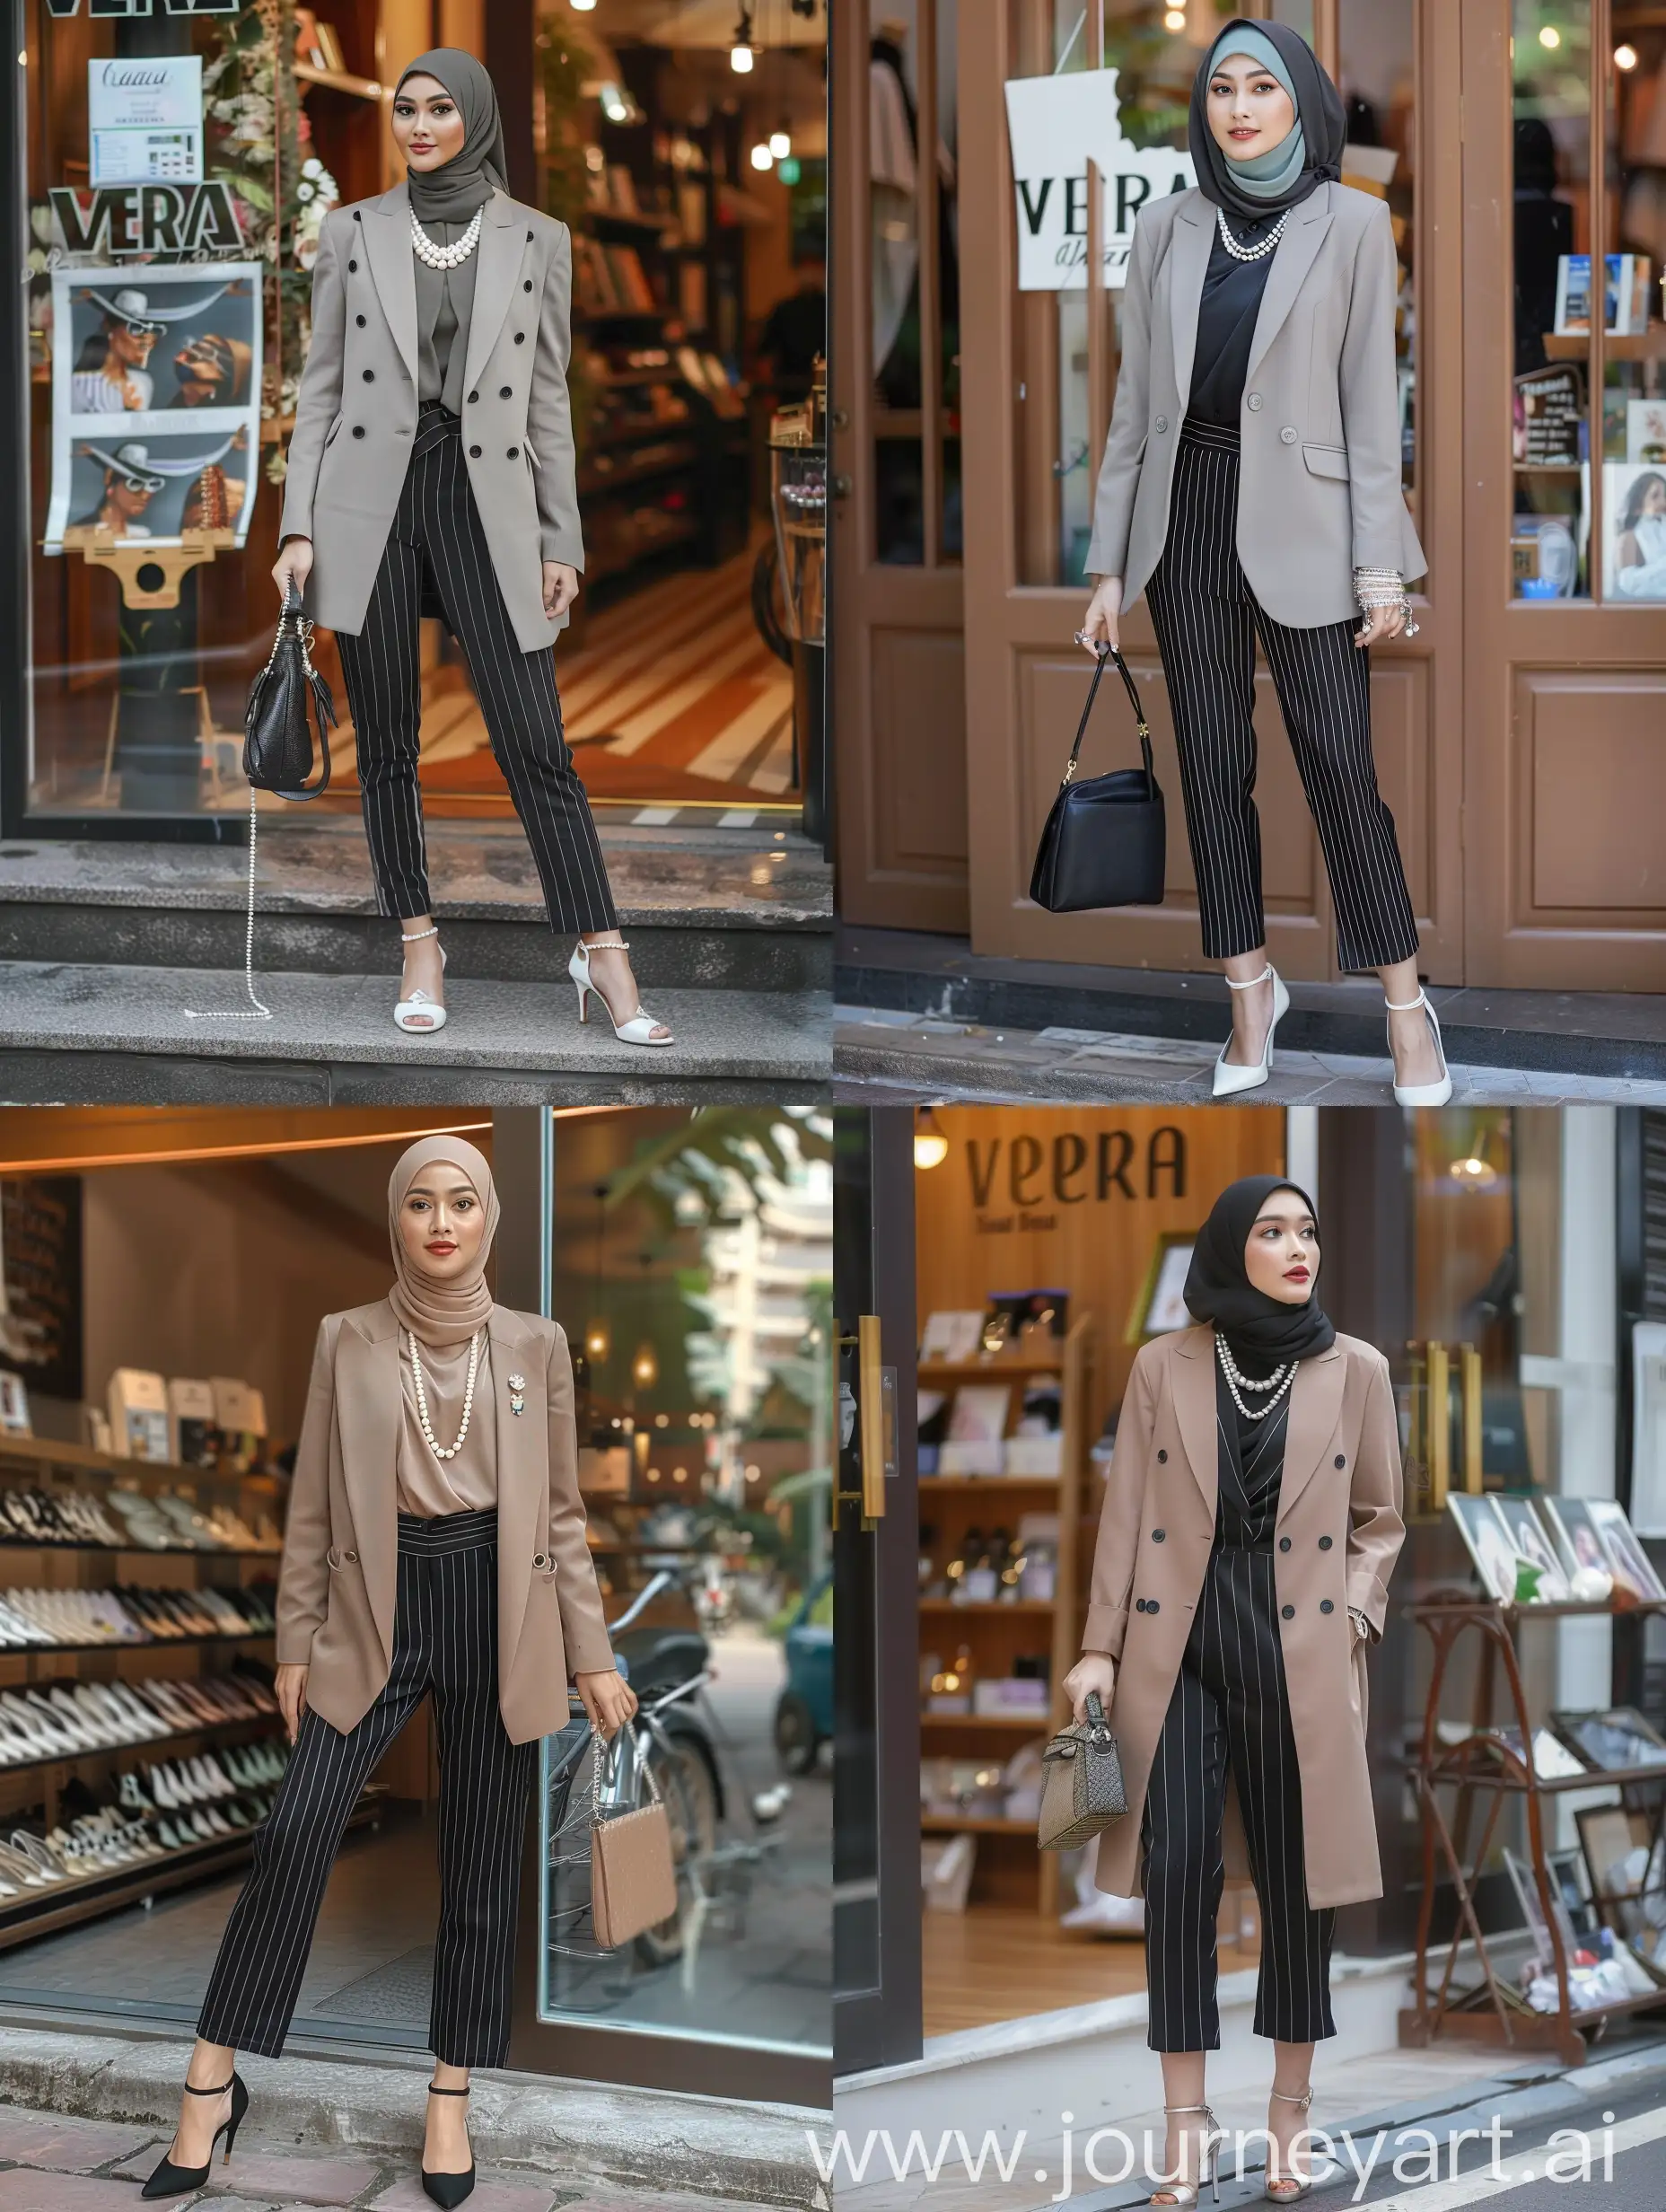 beautiful Indonesian hijab woman wearing a blazer and black striped women's pants,hight heels, pearl necklace and earrings, holding a handbag, she is standing in front of the vera shop